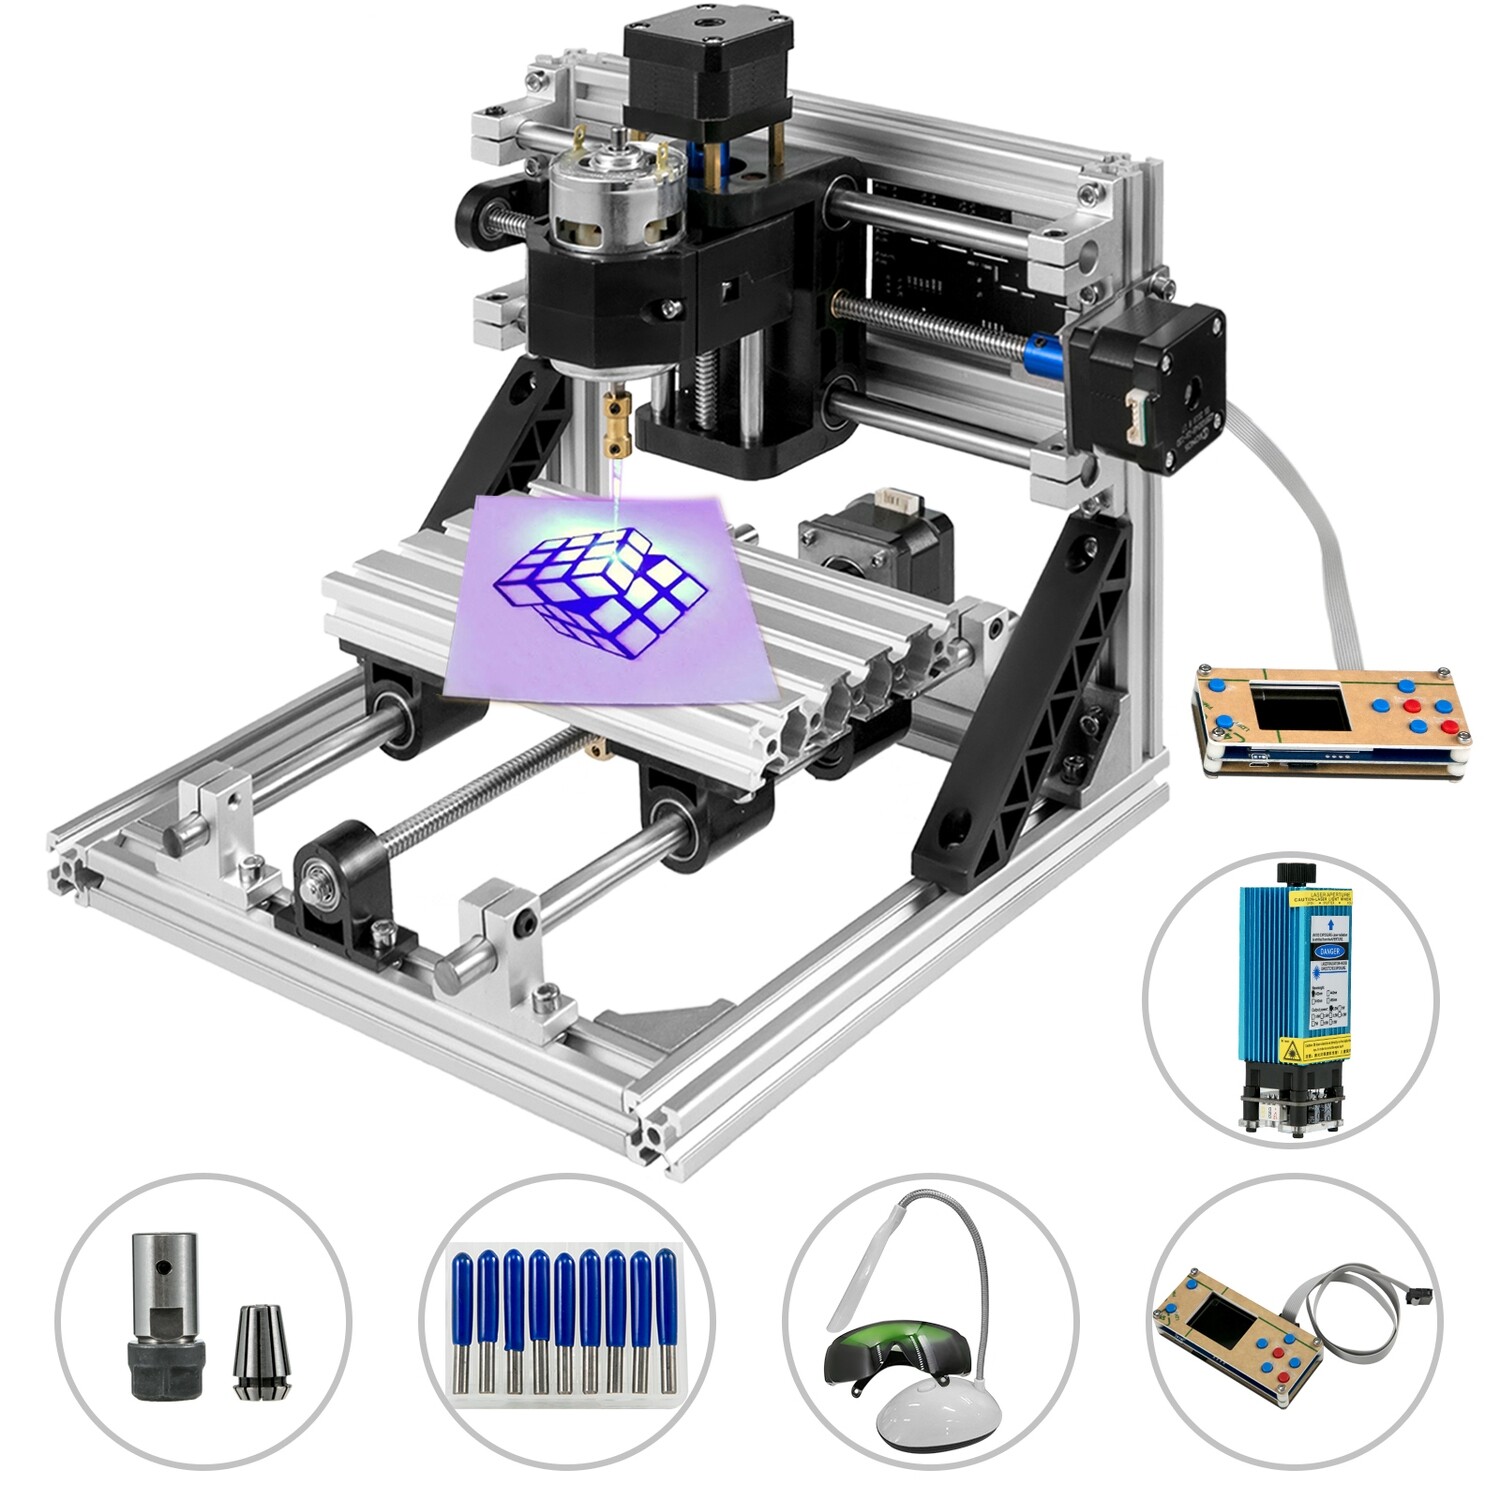 The 2418 CNC Router Kit with a 500mW laser engraver and an offline USB controller for wood plastic